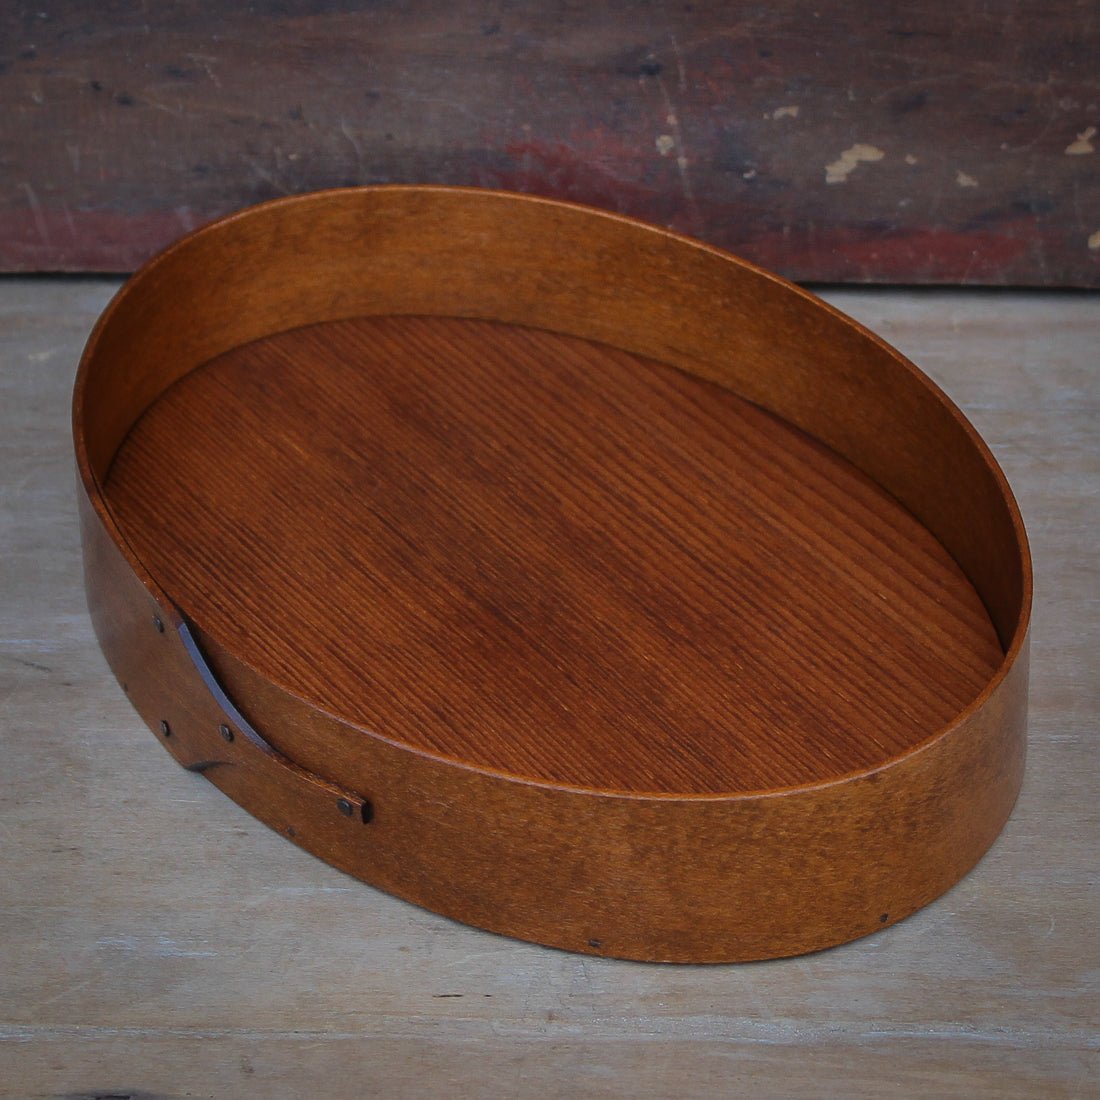 Shaker Style Oval Stitchers Tray, LeHays Shaker Boxes, Handcrafted in Maine, Antiqued Natural Finish, Side View